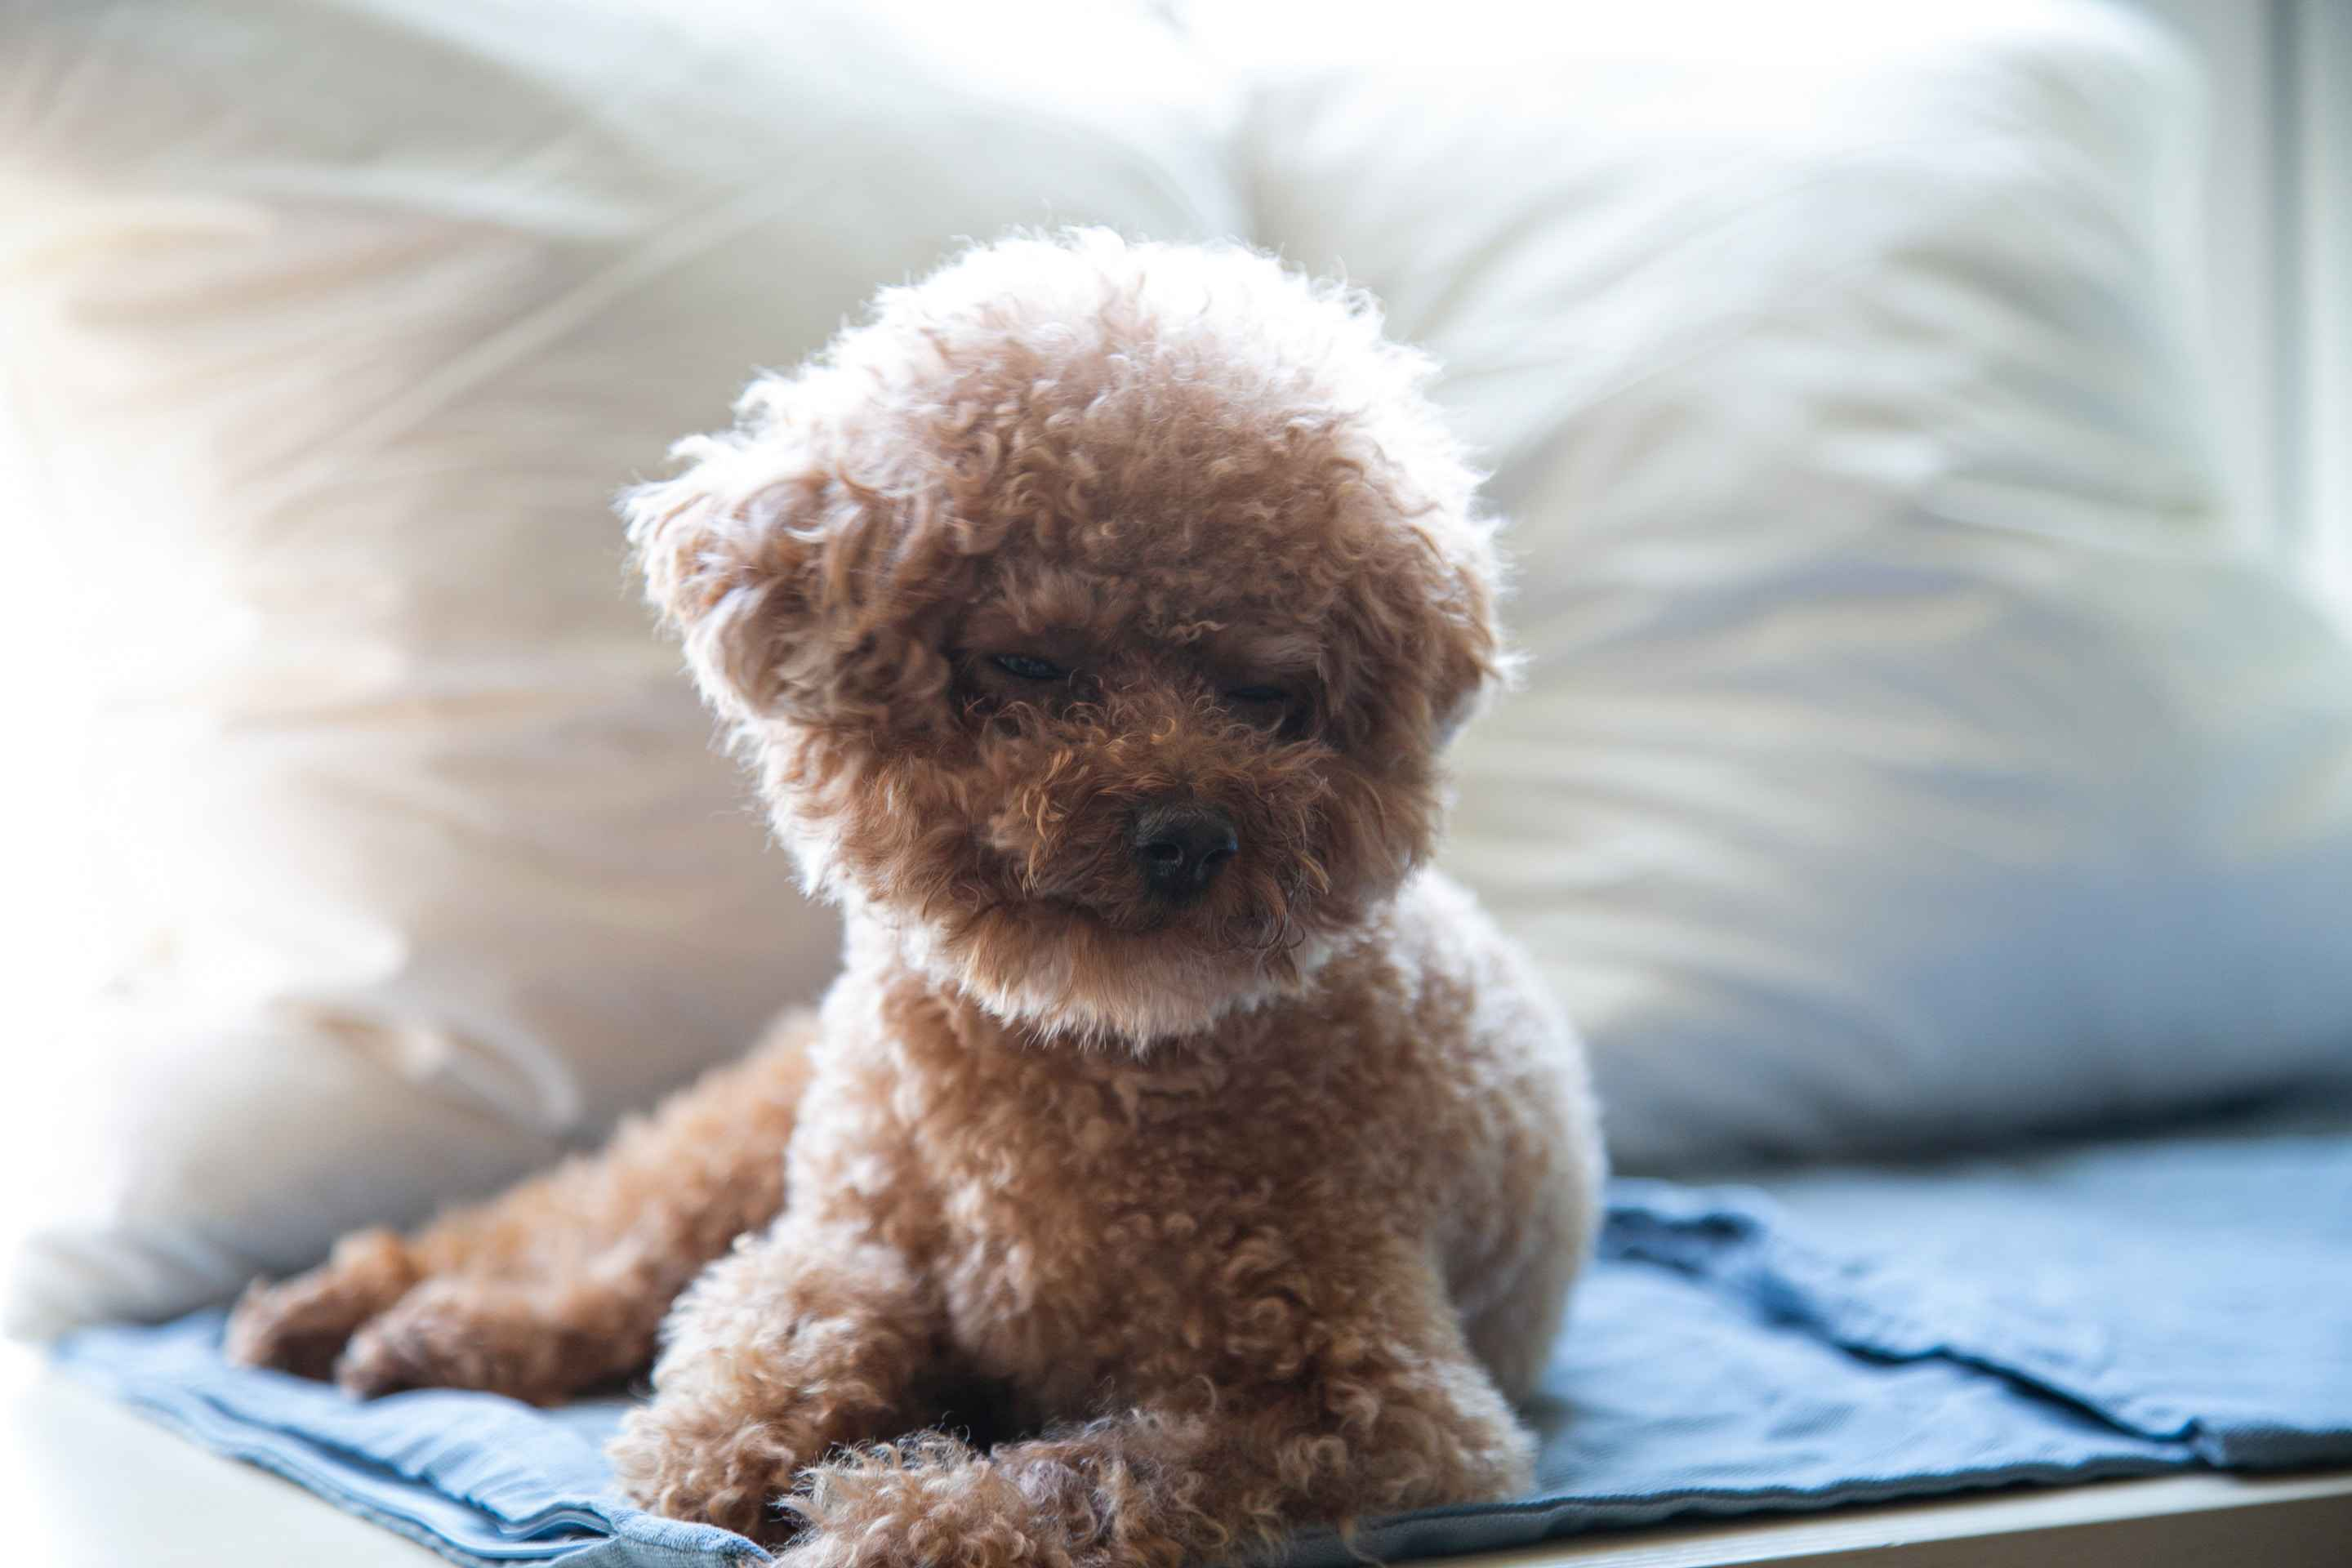 What are some ways to prevent your Poodle puppy from nipping or biting?